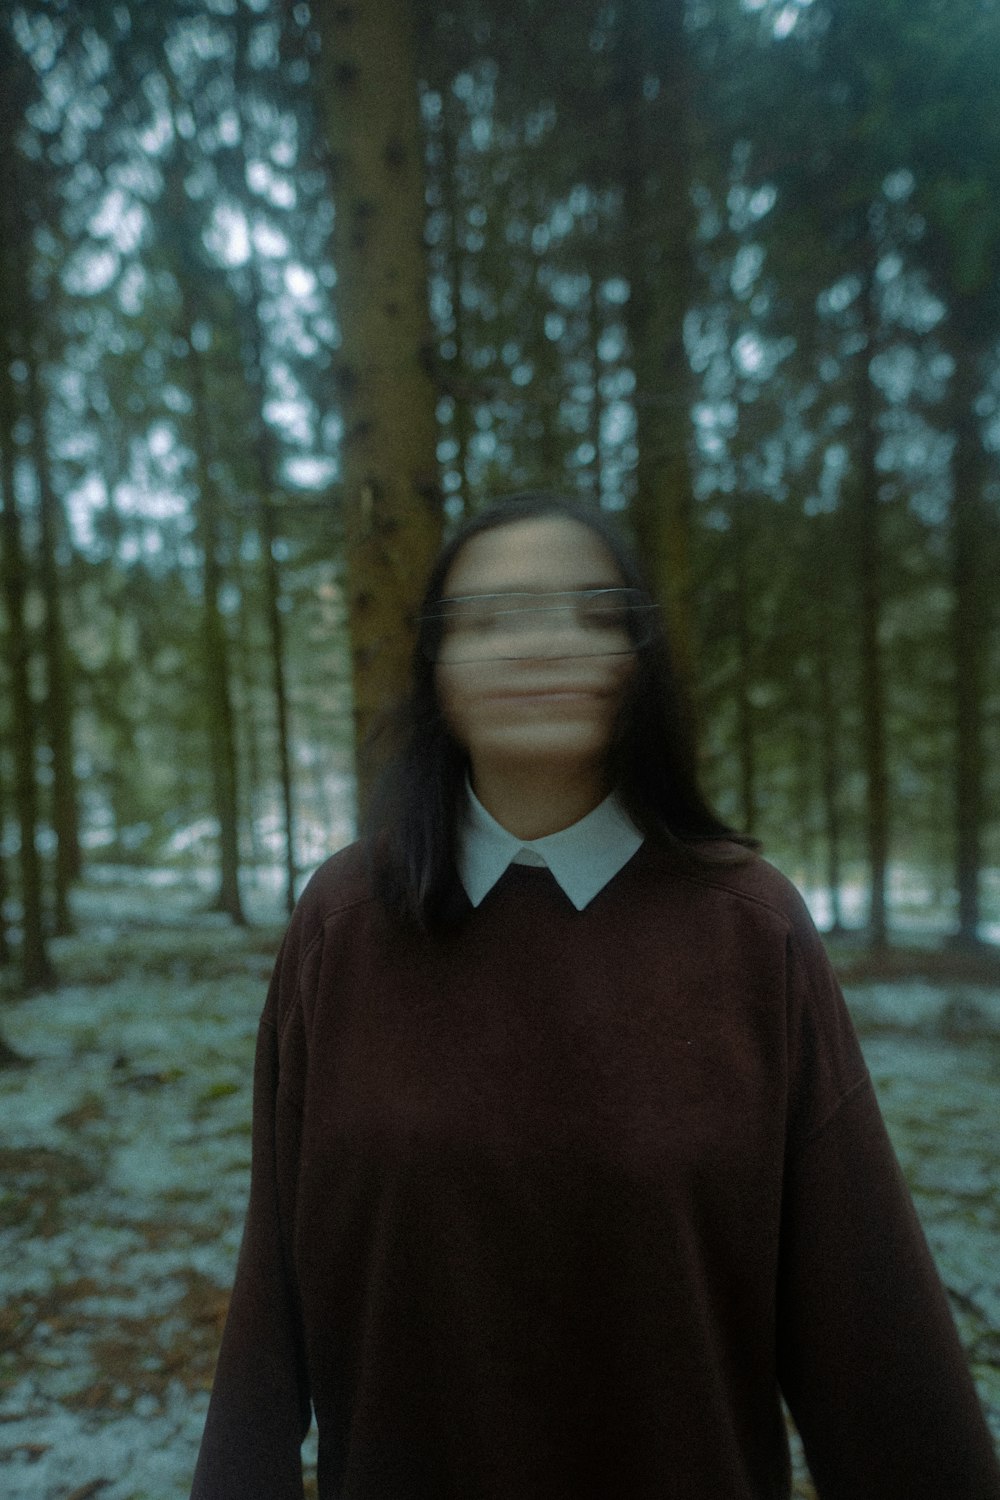 a blurry image of a person standing in a forest